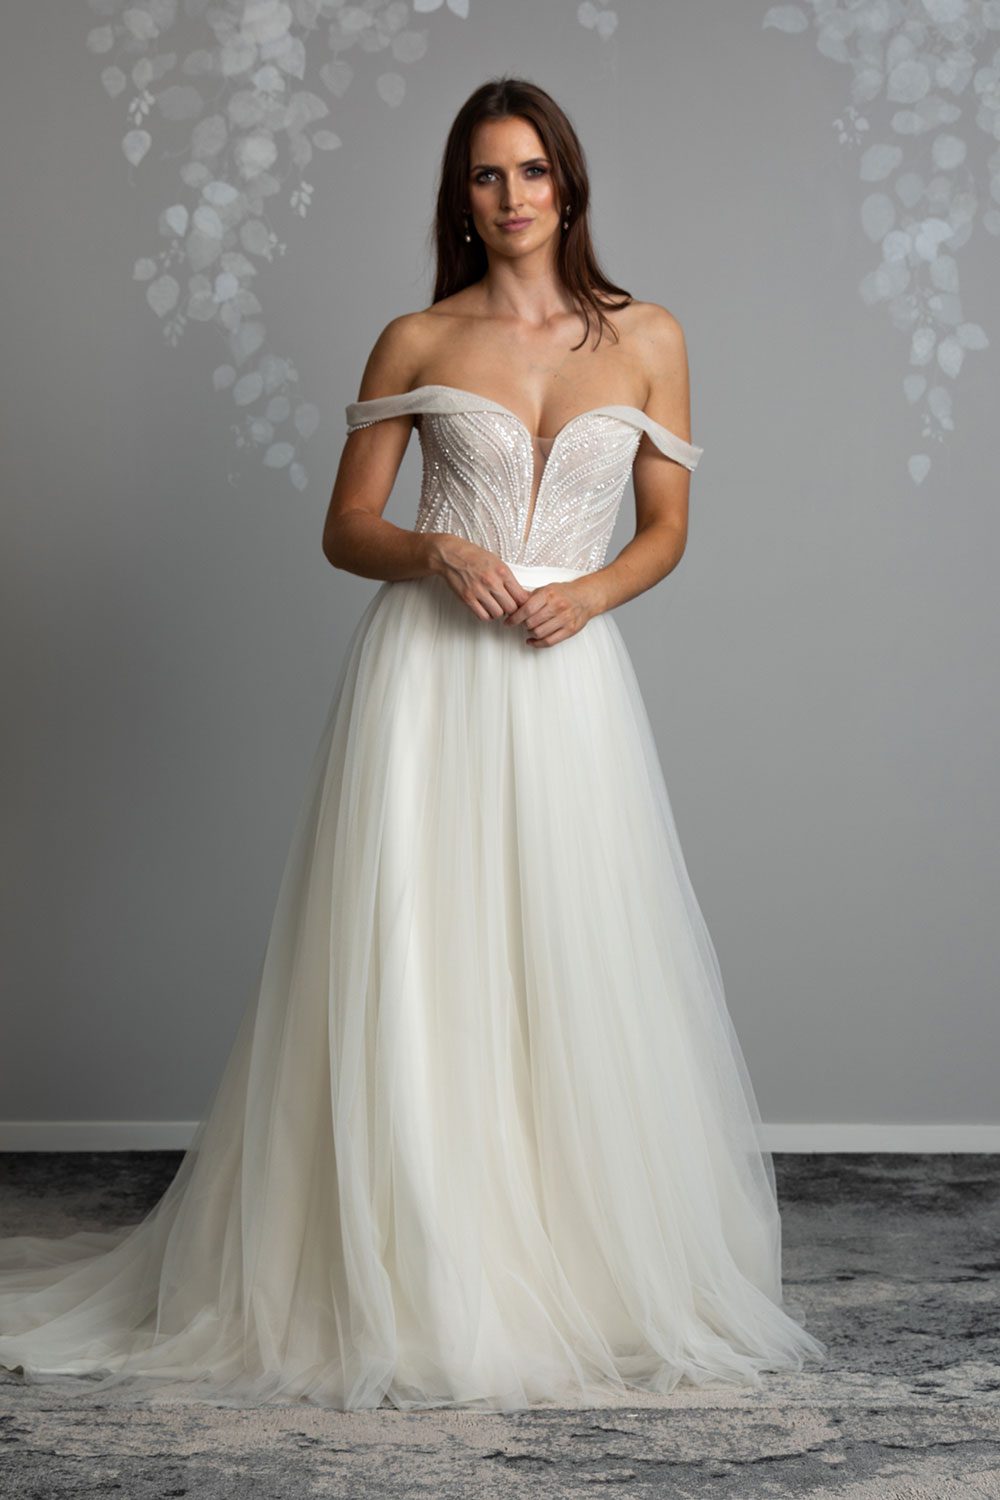 Aroha Wedding gown from Vinka Design - Beautiful & intricate pearl beading is hand-appliqued along this wedding gown’s structured, boned bodice. Delicate off-shoulder straps are complemented by the sweetheart neckline. - front view of model with beaded bodice and soft tulle skirt